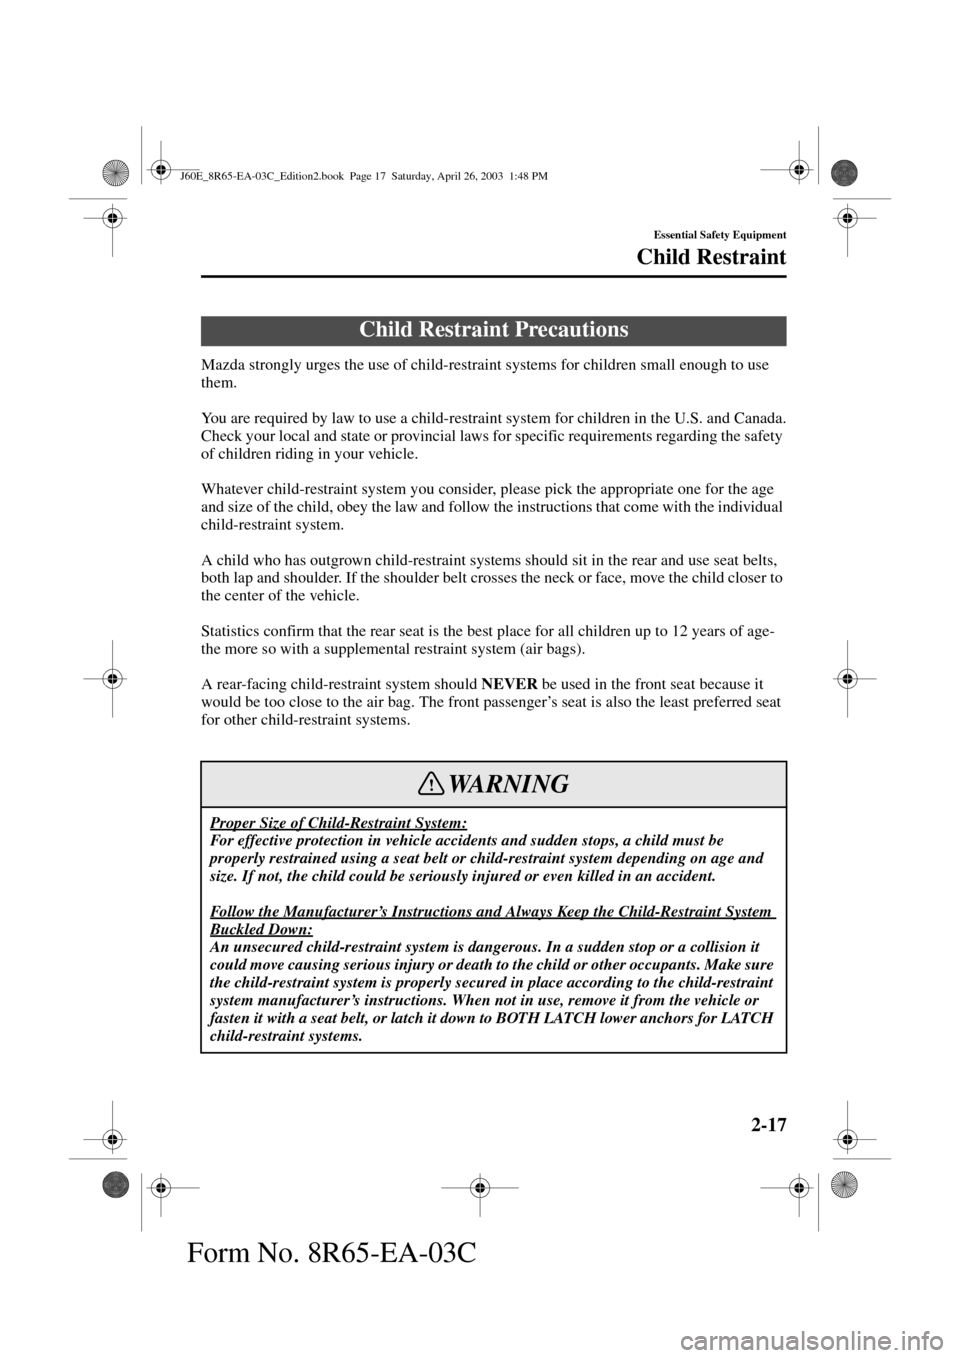 MAZDA MODEL RX 8 2004   (in English) Owners Manual 2-17
Essential Safety Equipment
Form No. 8R65-EA-03C
Child Restraint
Mazda strongly urges the use of child-restraint systems for children small enough to use 
them.
You are required by law to use a ch